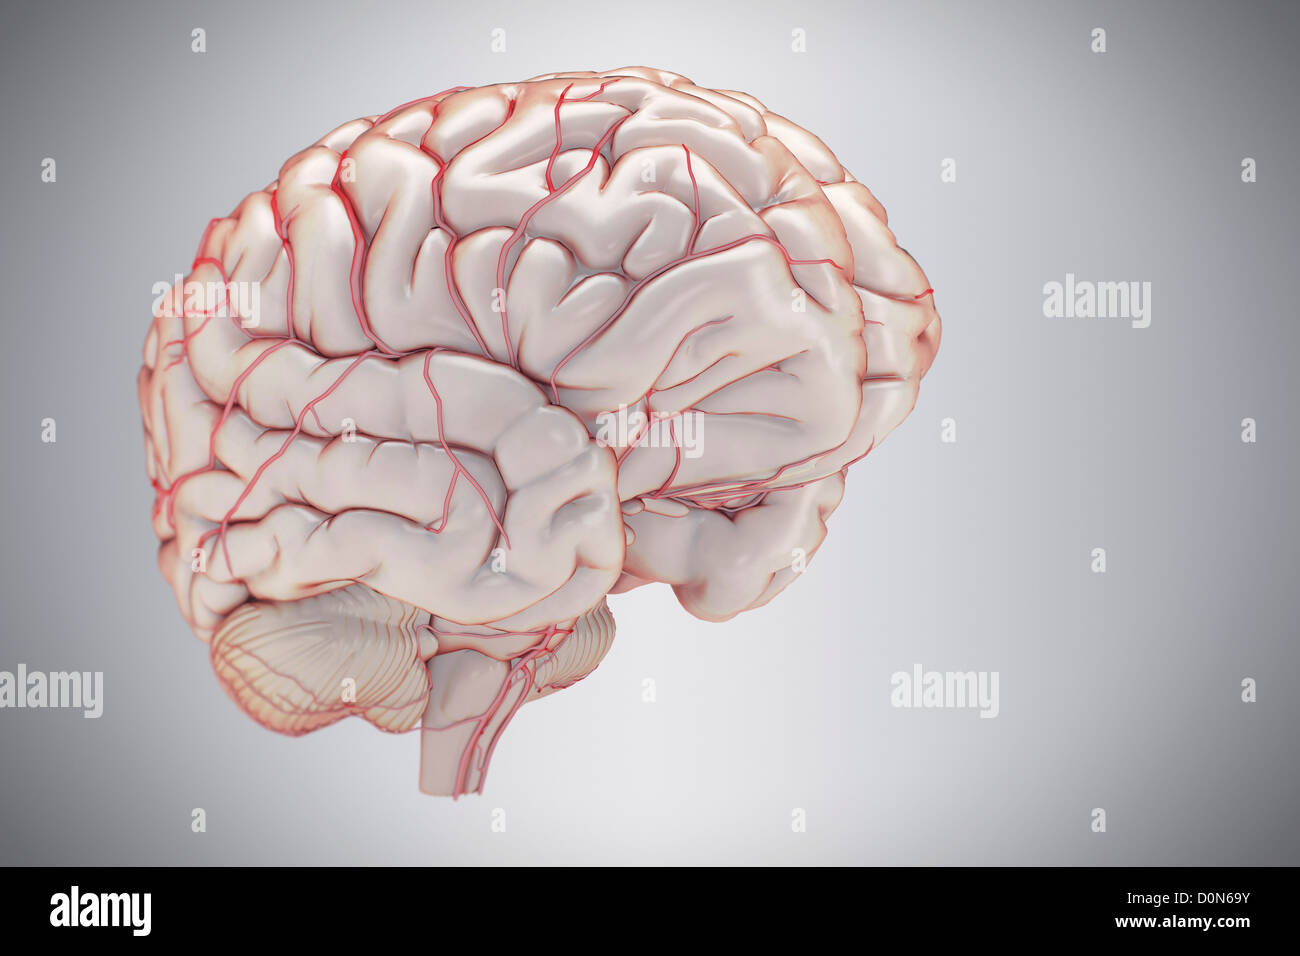 Three-quarter view of the brain and its blood supply. Stock Photo